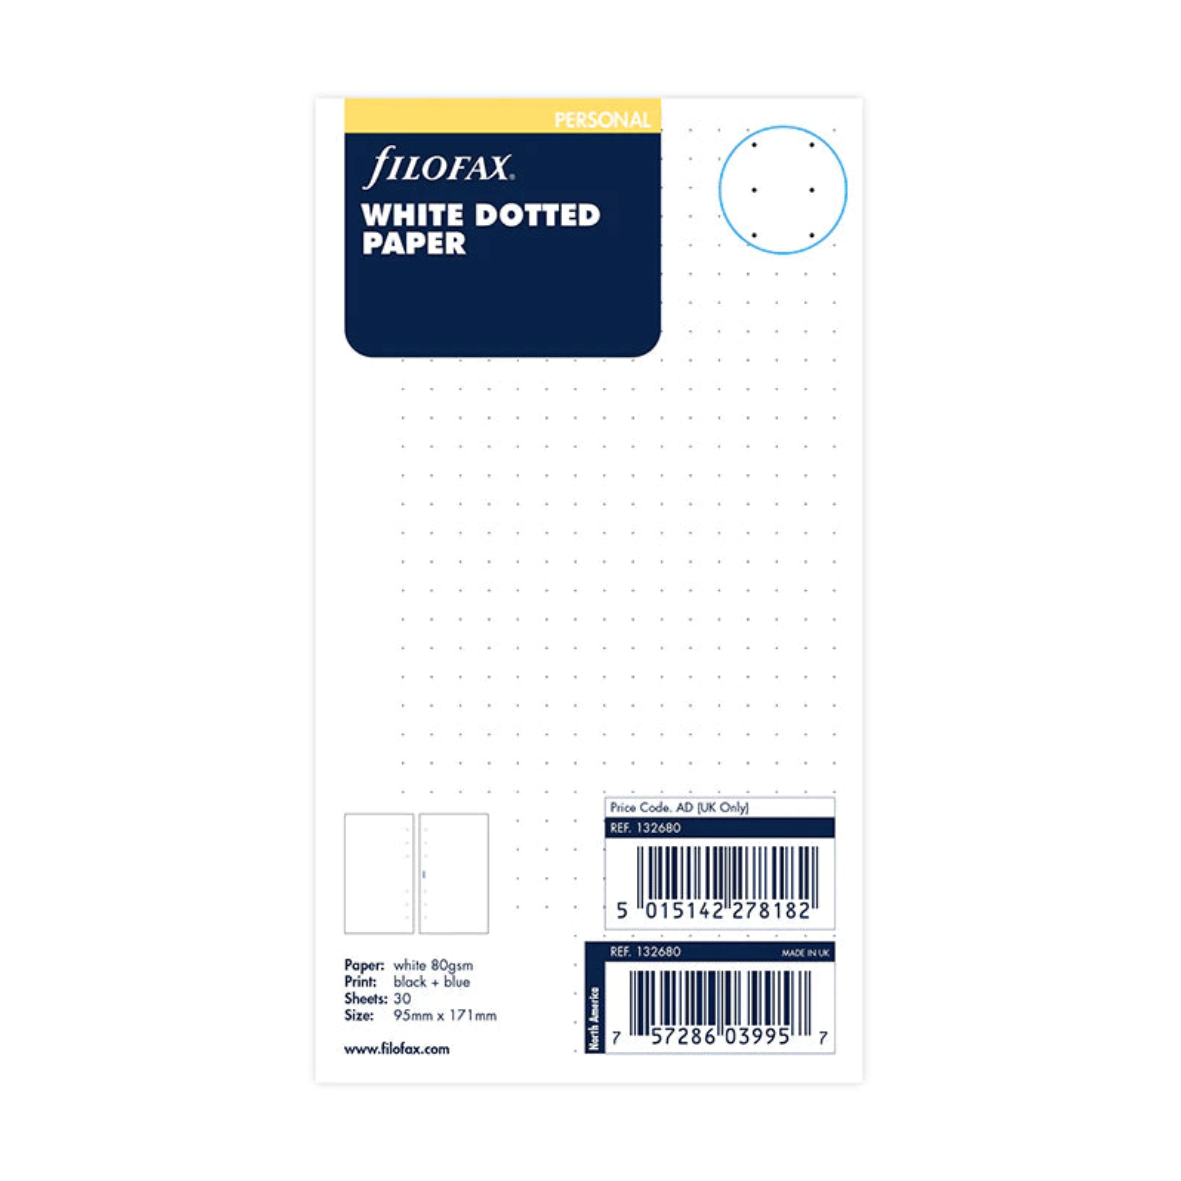 White Dotted Notepaper Personal Refill _Packaging_.jpg